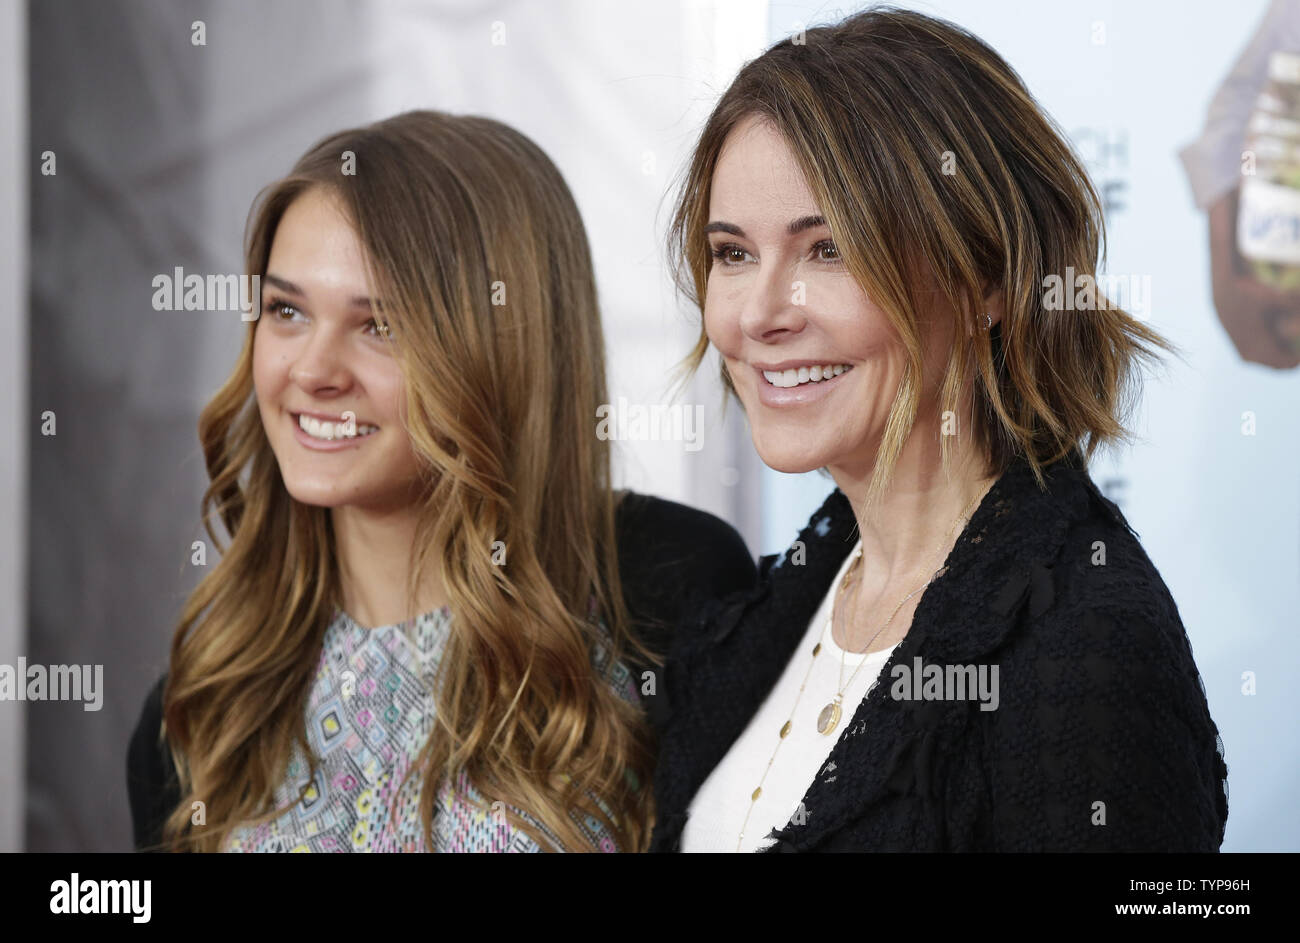 Christa Miller and Charlotte Burns arrive on the red carpet at the 'Wish I Was Here'  premiere at AMC Lincoln Square Theater in New York City on July 14, 2014. Focus Features will release Wish I Was Here in select cities on Friday, July 18th and will expand the release on Friday, July 25th.        UPI/John Angelillo Stock Photo